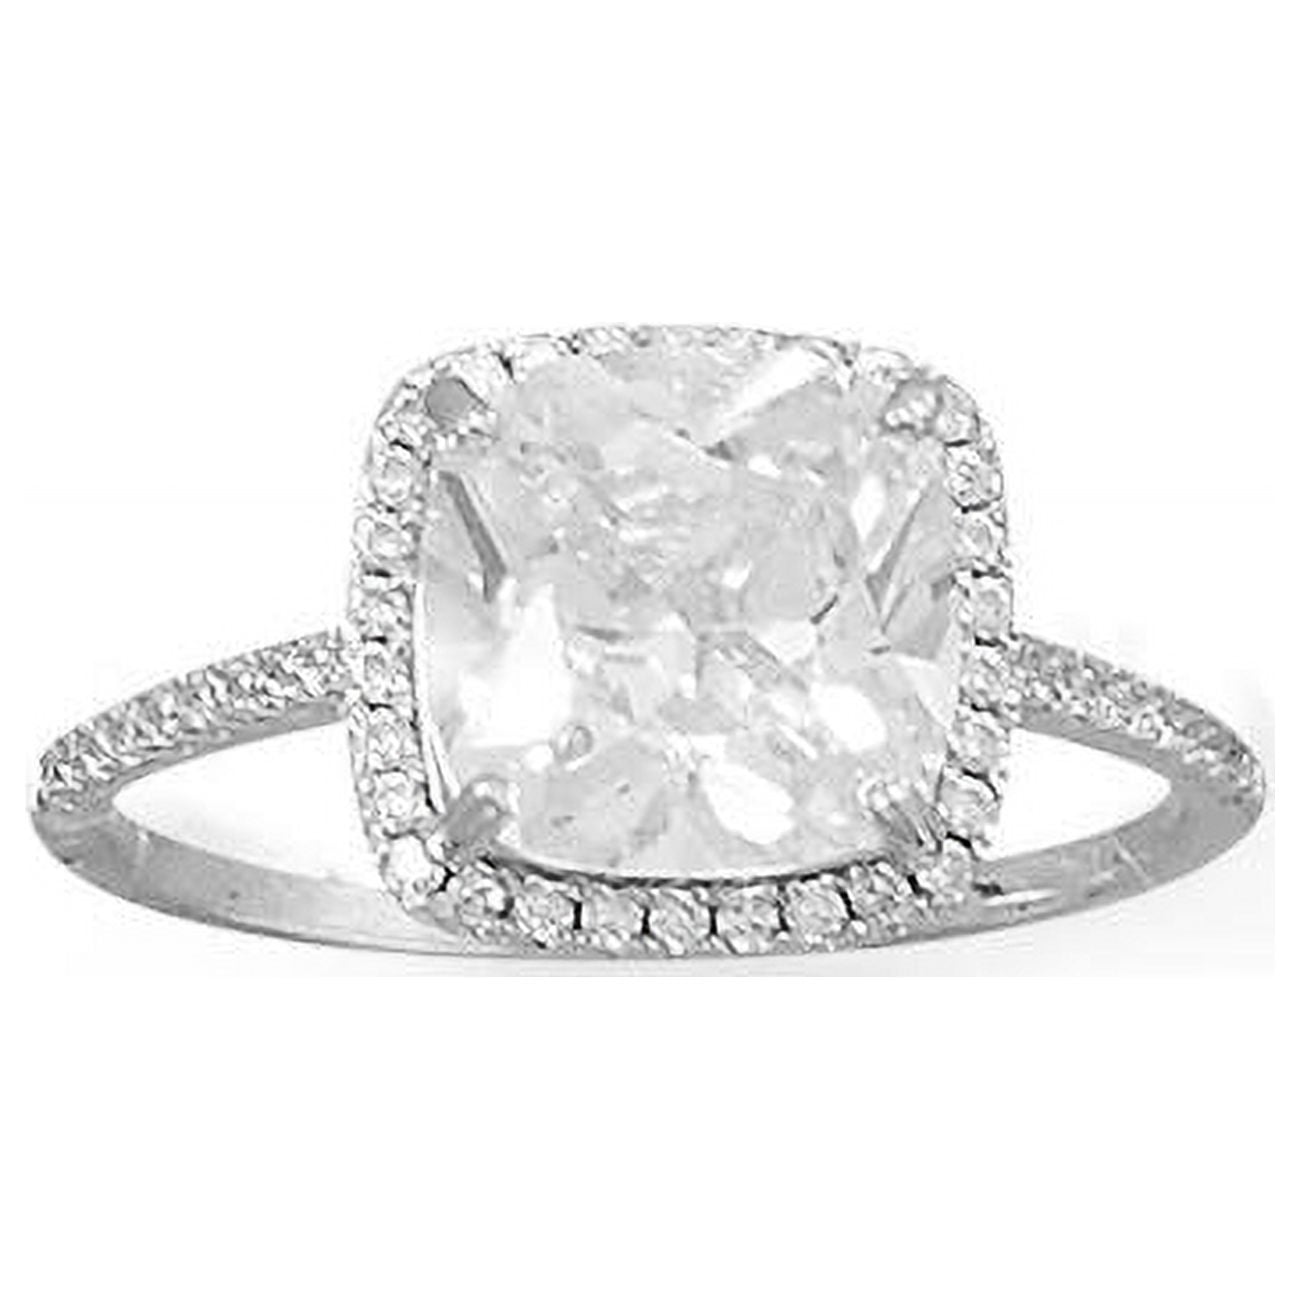 Picture of Precious Stars 83807-10 Sterling Silver Cushion-Cut Cubic Zirconia Halo Engagement Ring - Size 10